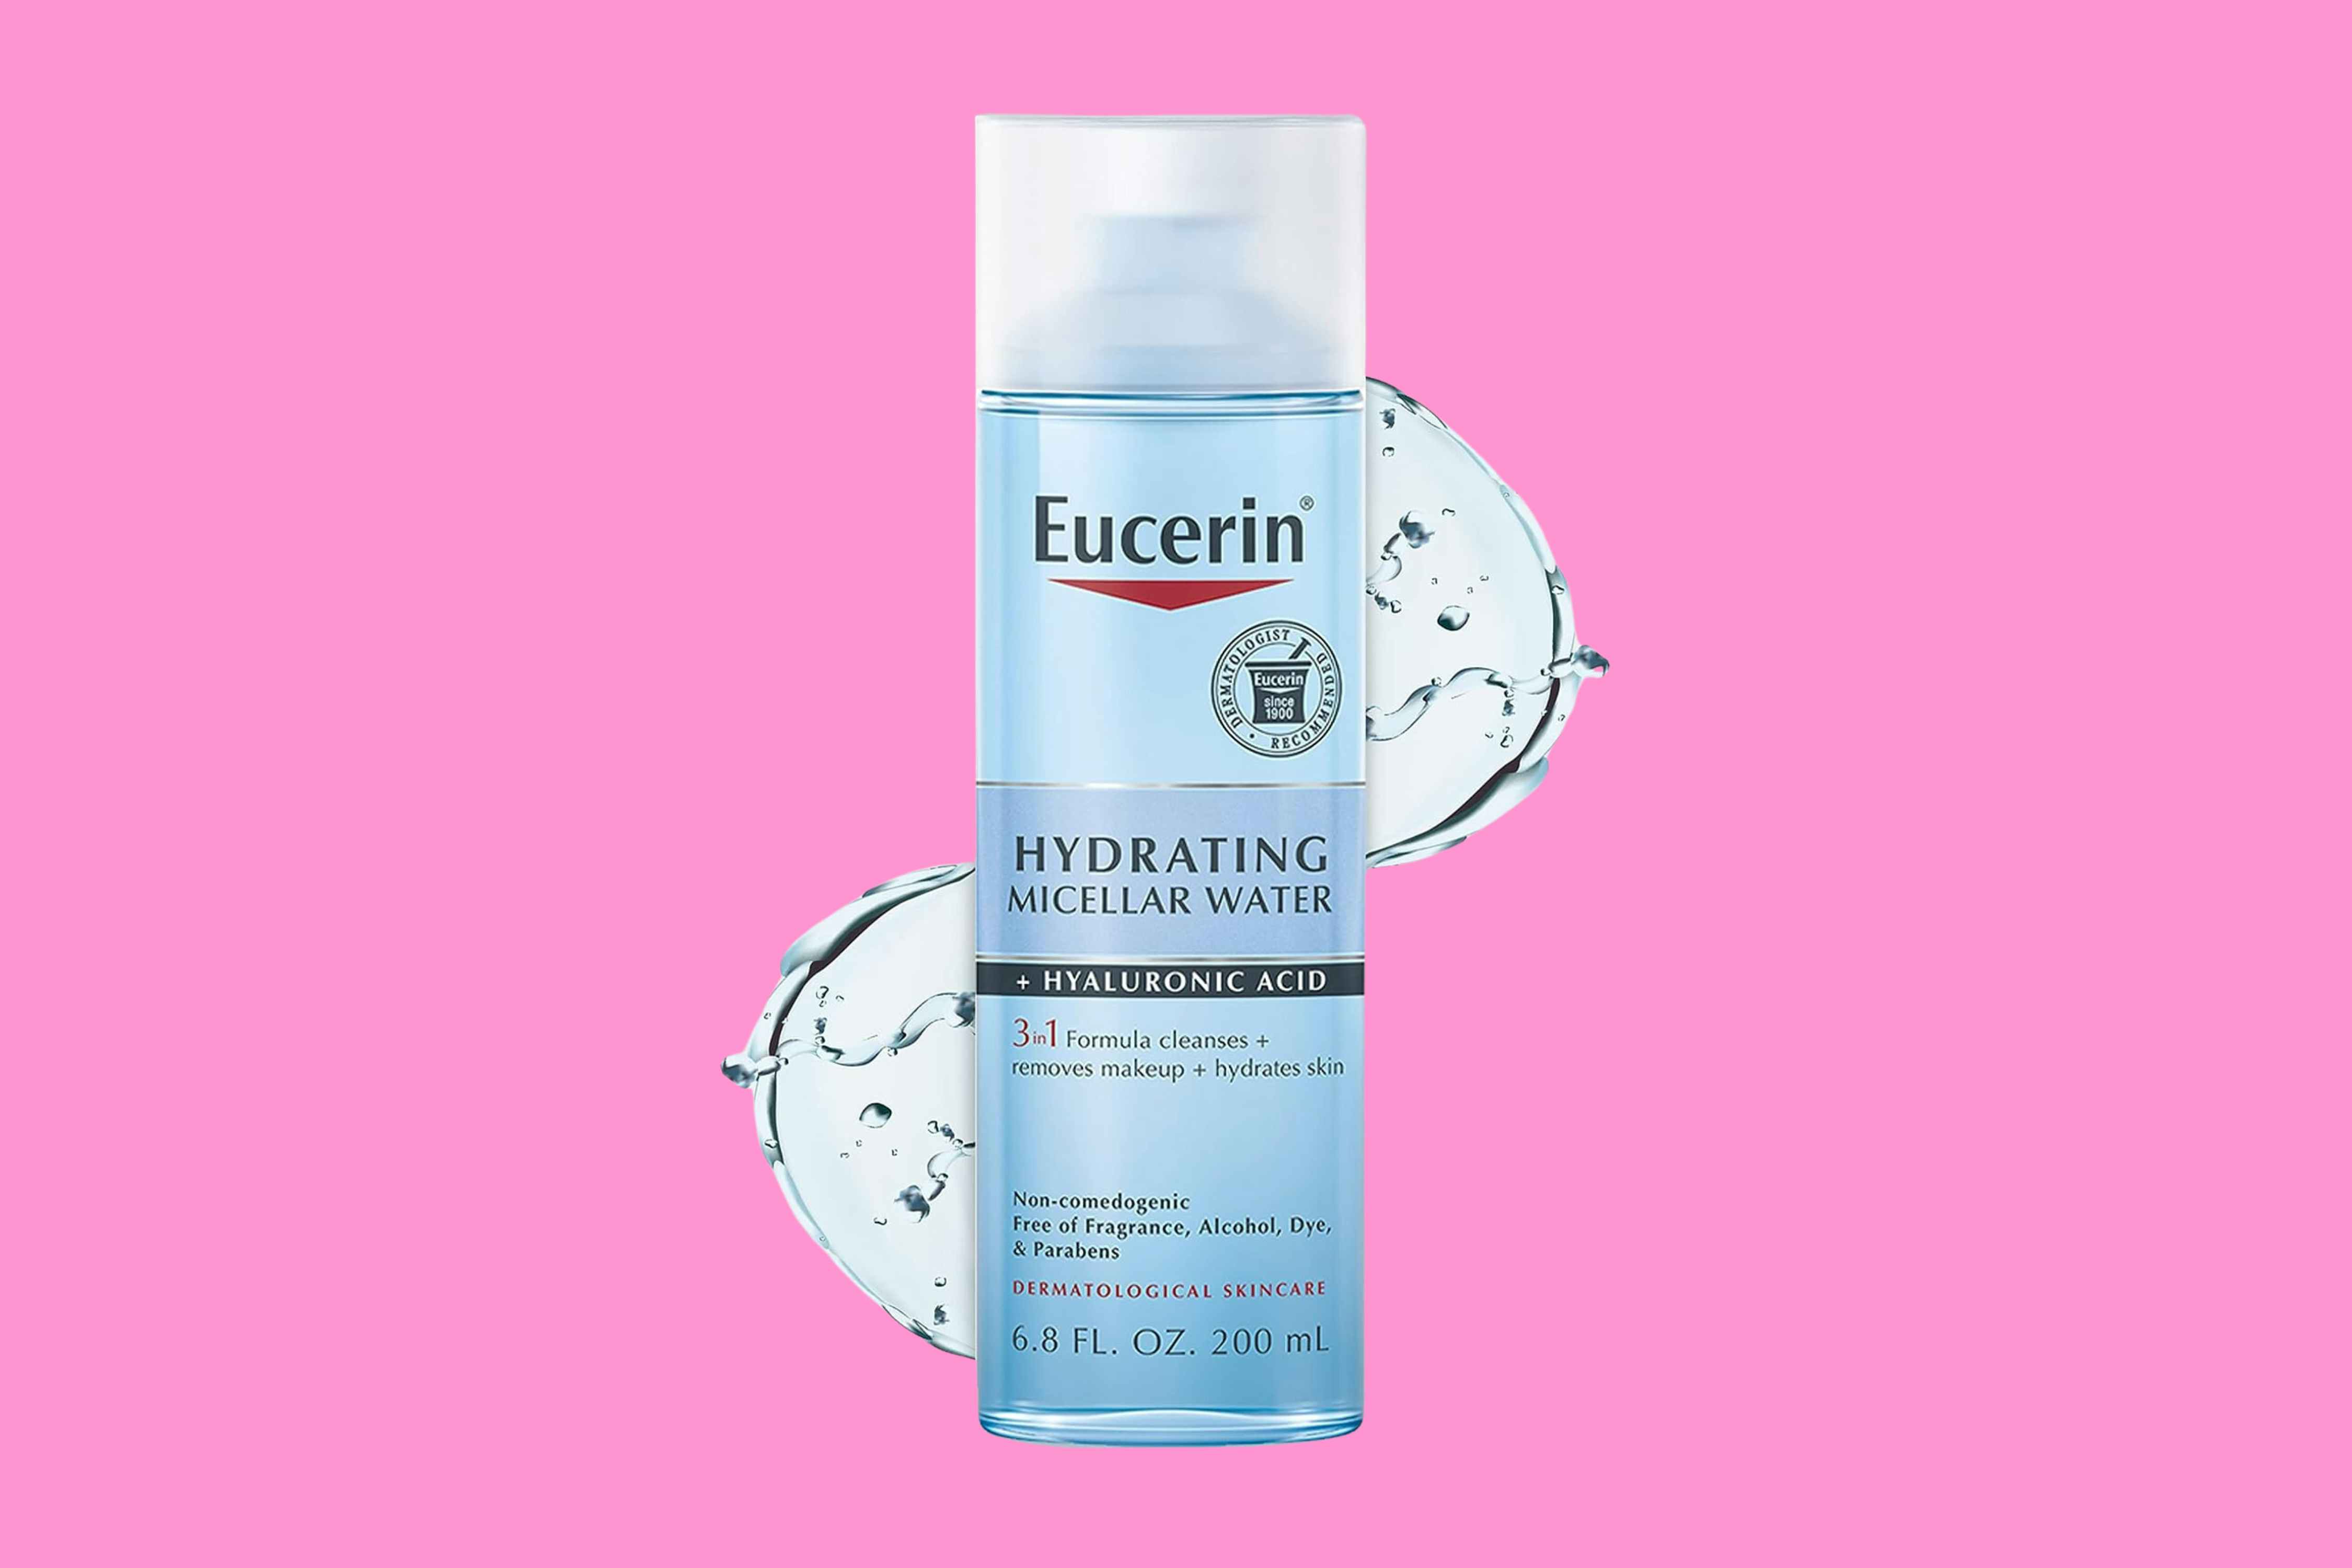 Eucerin Micellar Water Drops, as Low as $3.57 Each With Amazon Promo